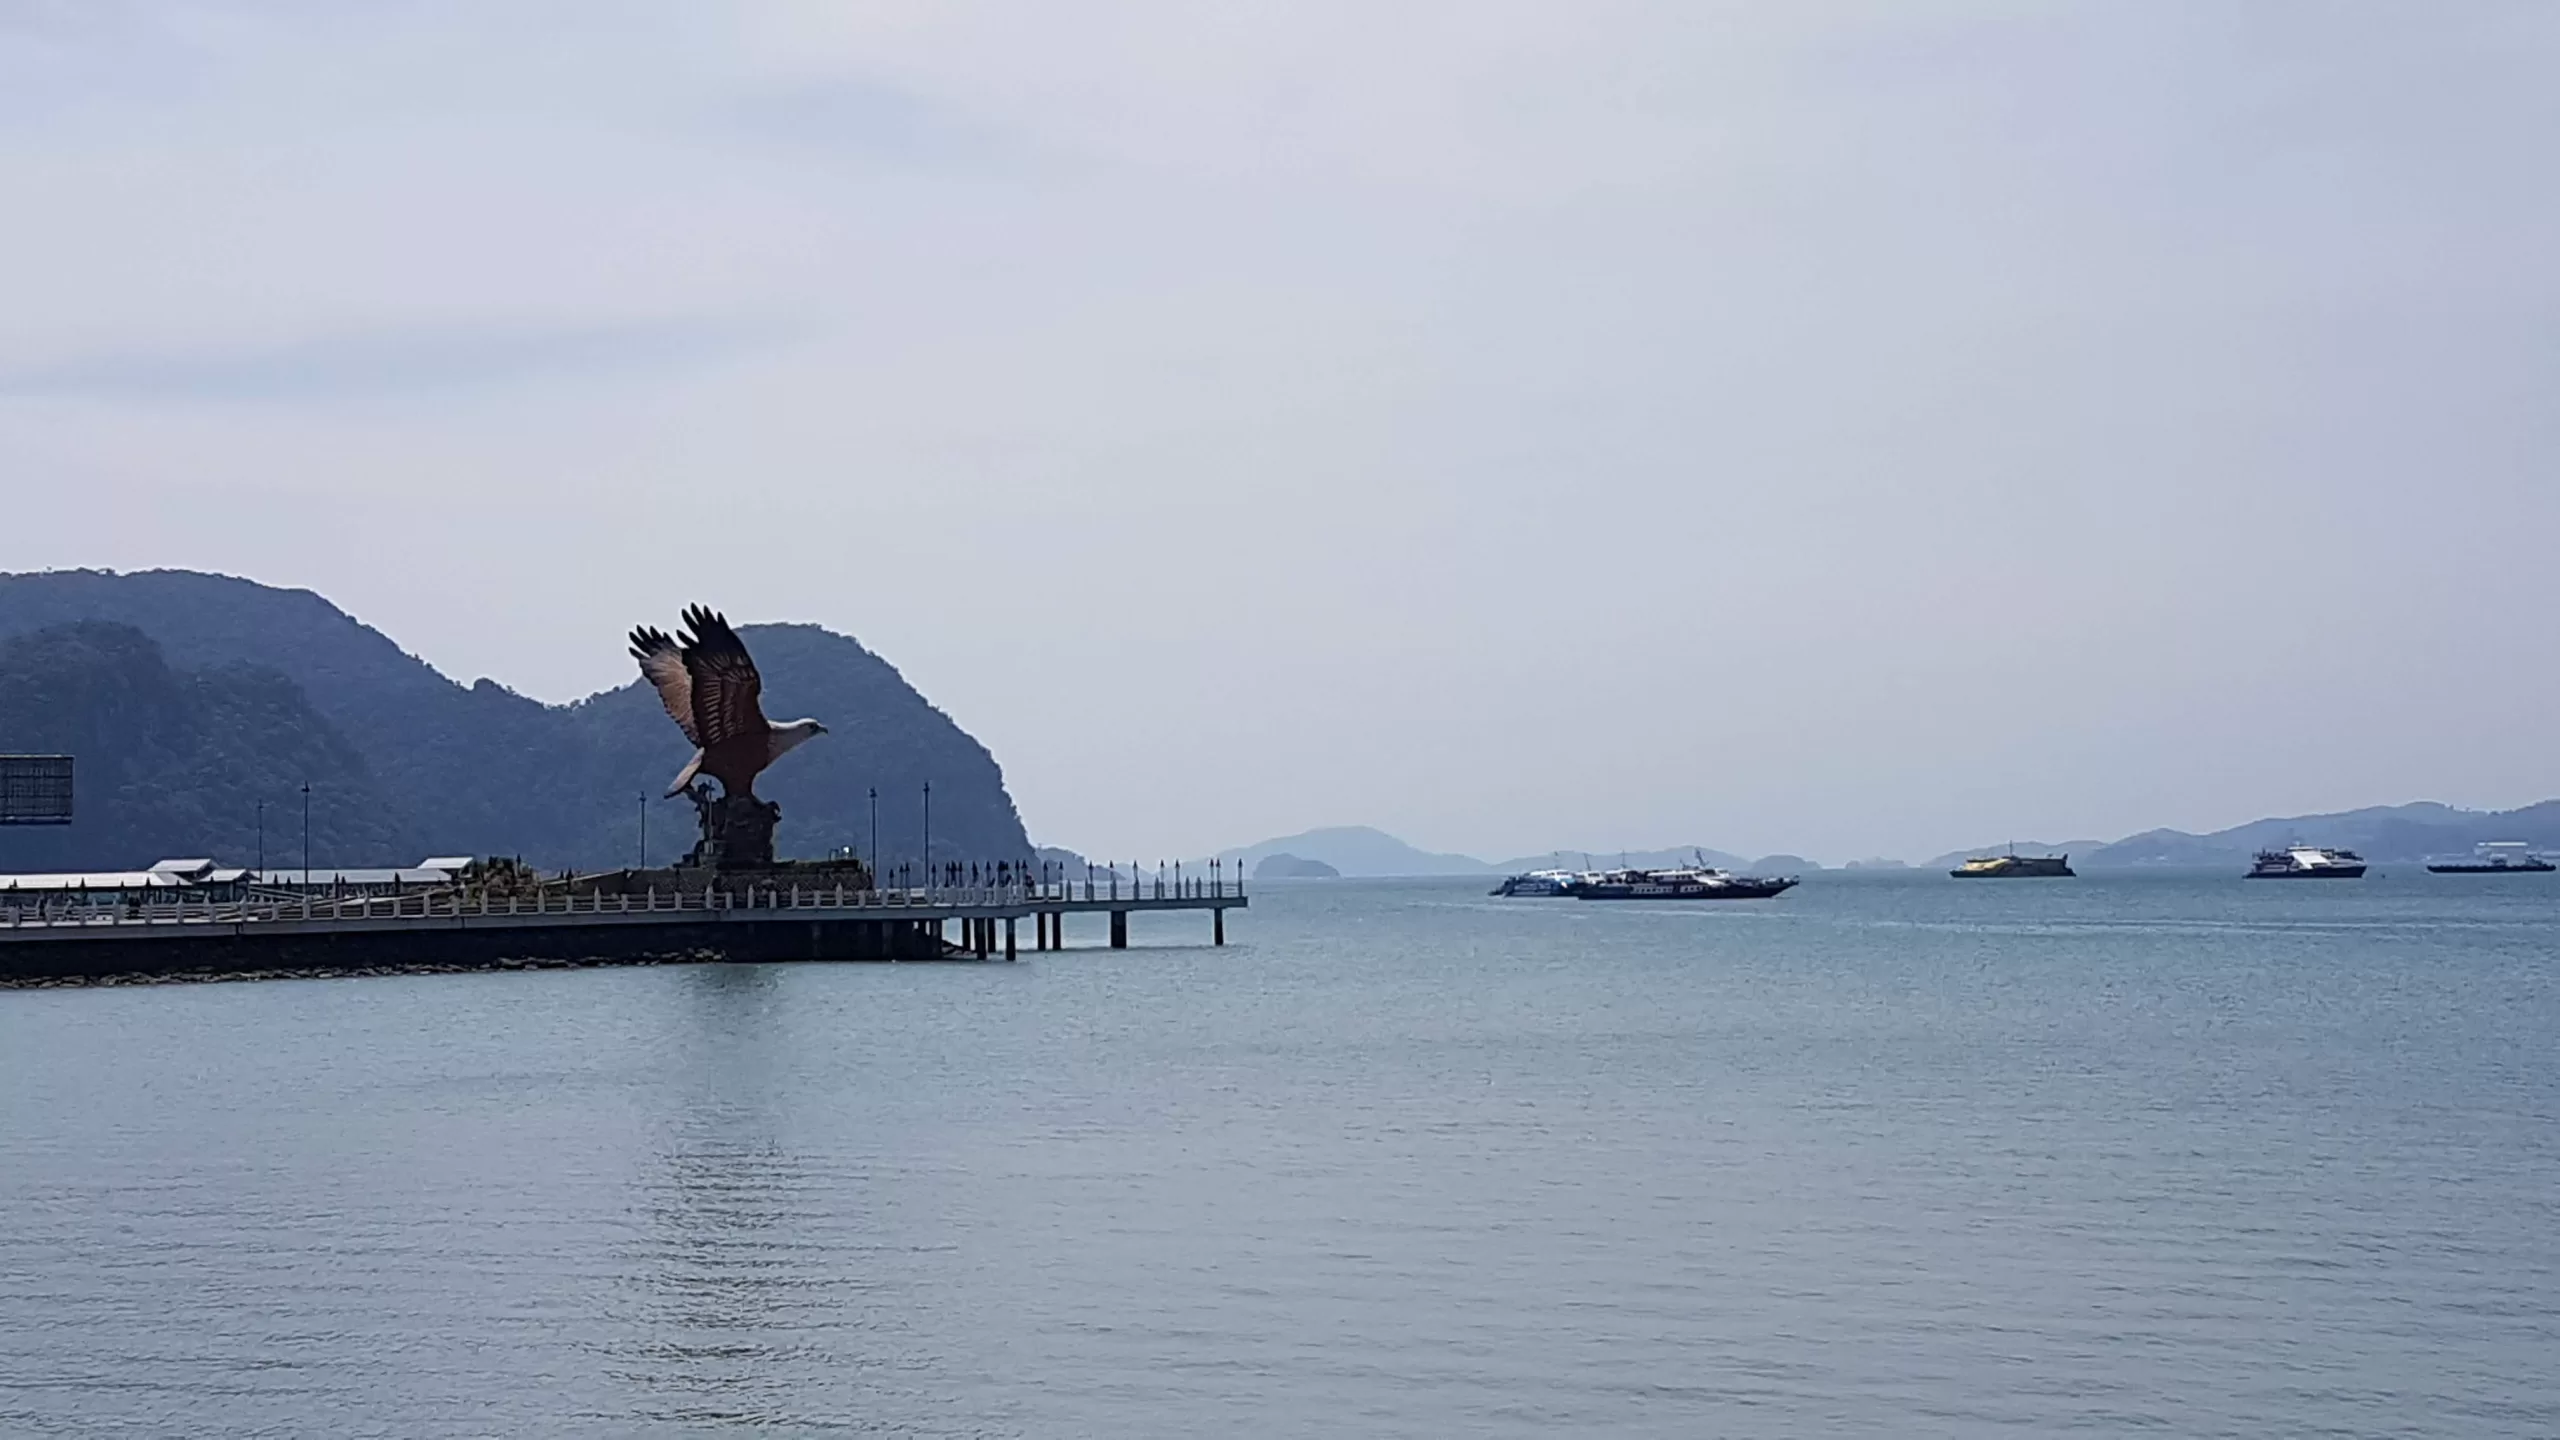 View of Eagle Square (Dataran Helang) & Strait of Malacca in Langkawi, Malaysia